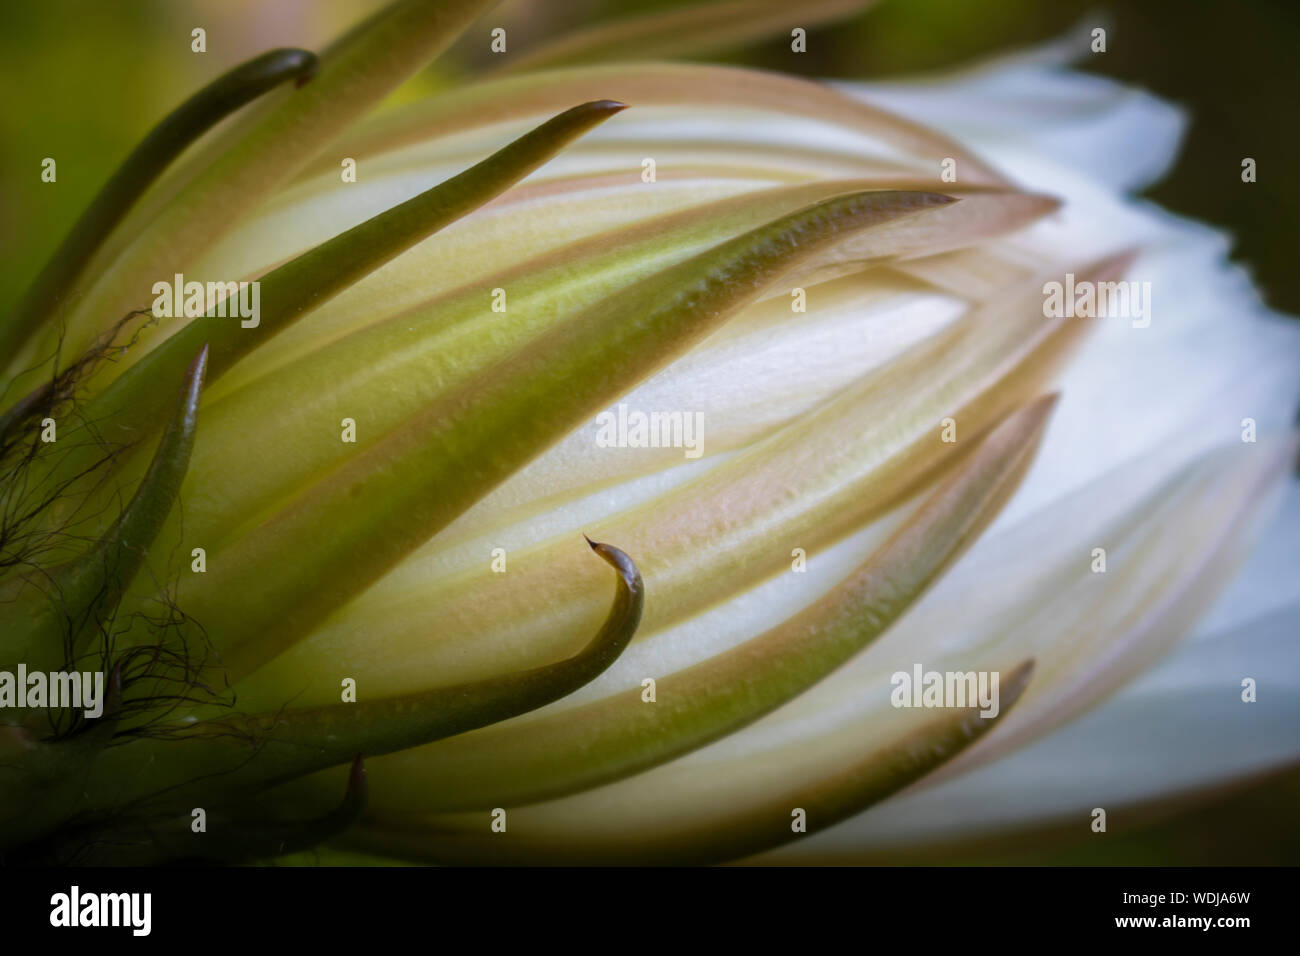 Conceptual macro of cactus flower waiting to bloom with pointed petals. Stock Photo